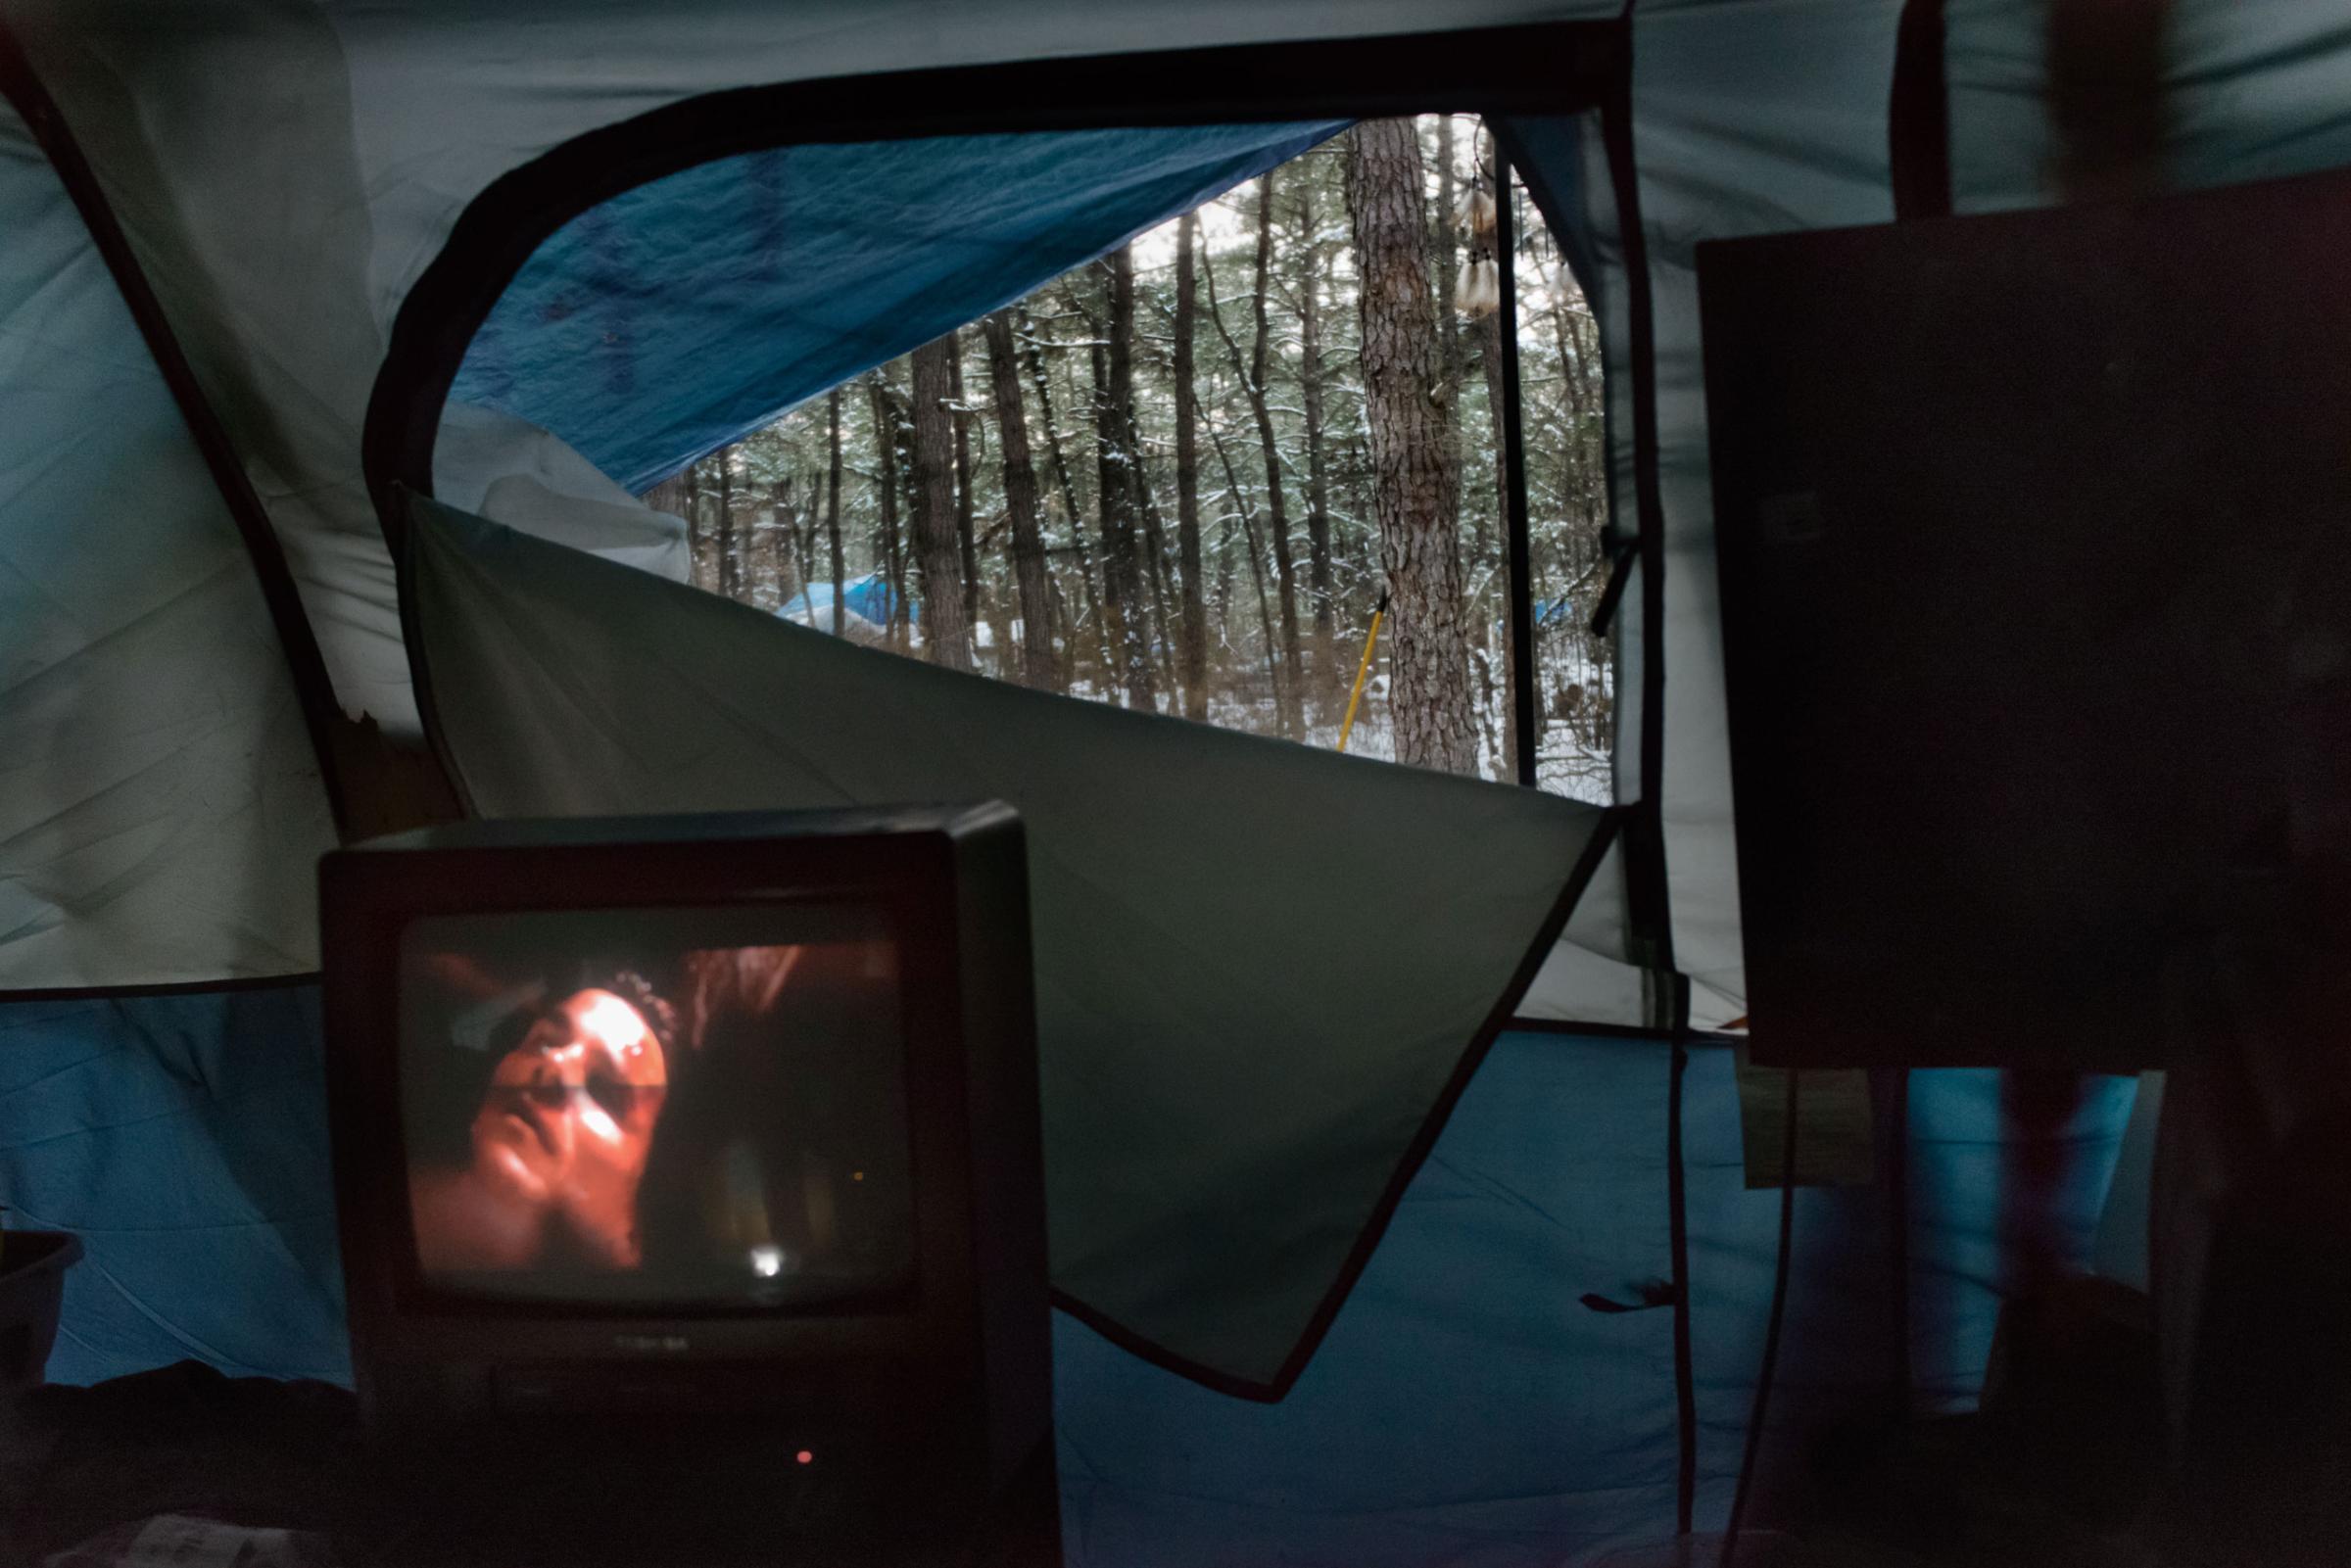 3 March  2014 - Tent City, Lakewood, New Jersey - Residents watch the latest batman film on DVD pwered by a generator. - Christopher Occhicone